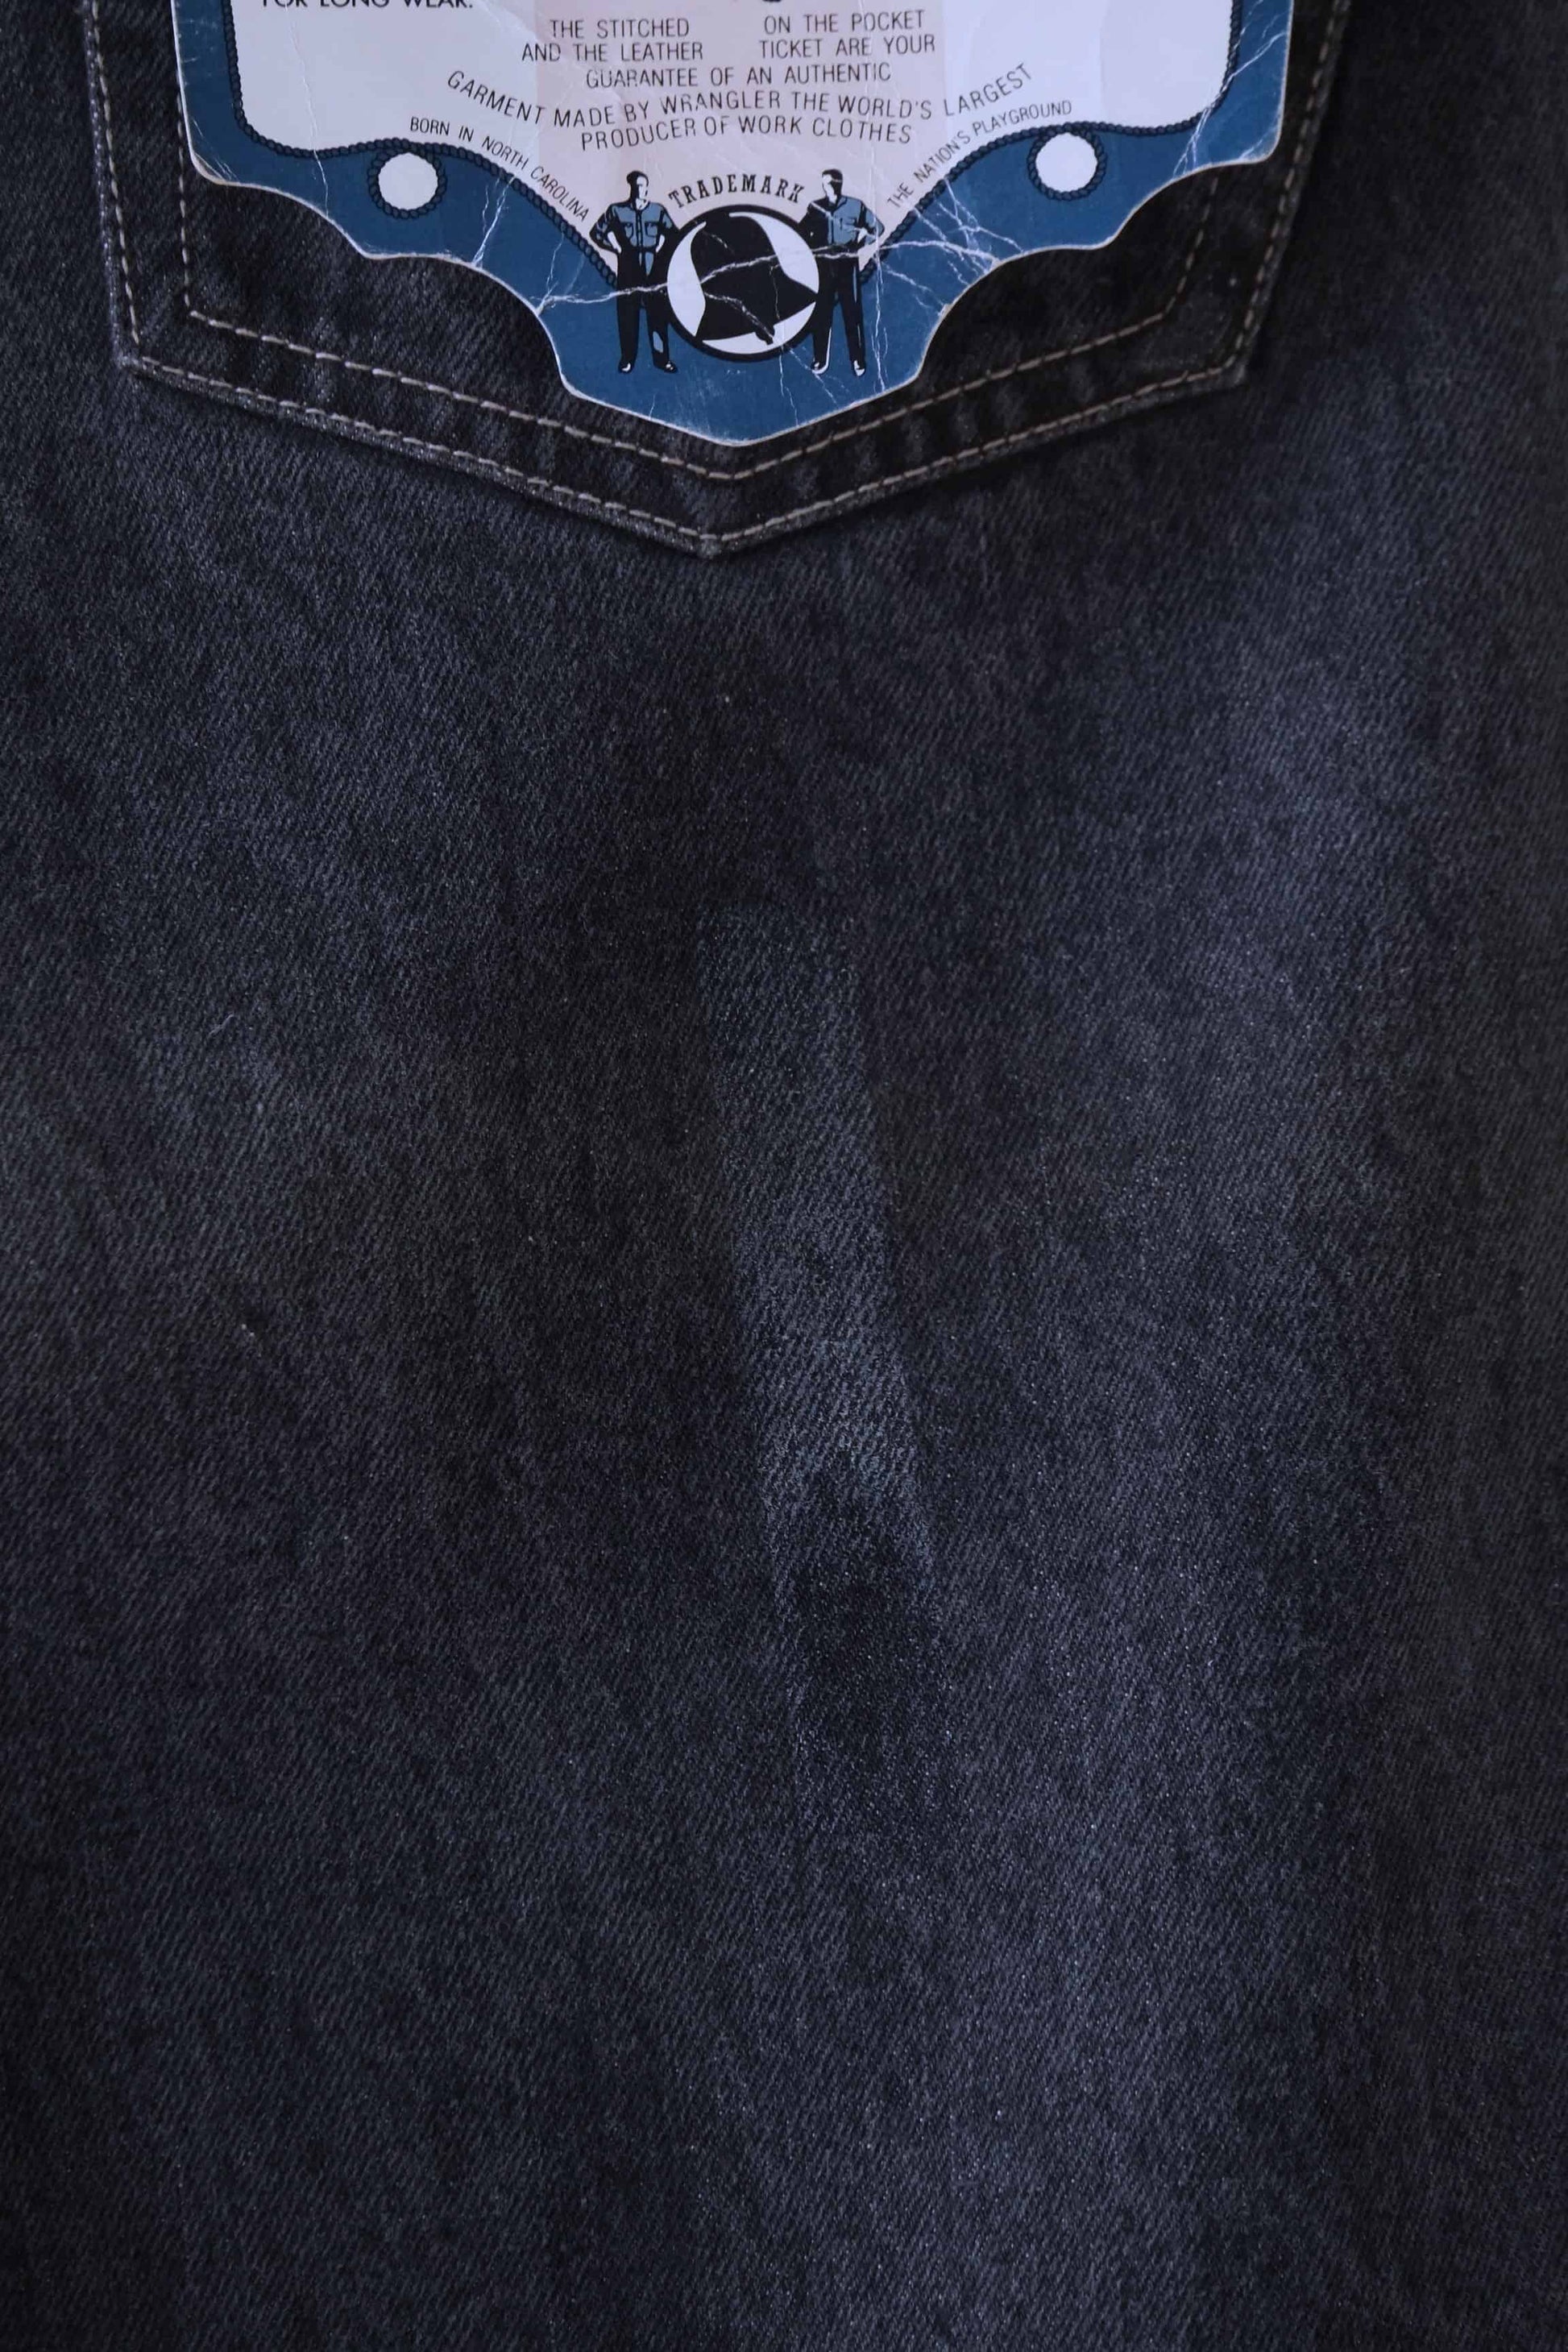 Close view of a discoloration spot on the back of a pair of WRANGLER Vintage 90's Black Wash Jeans